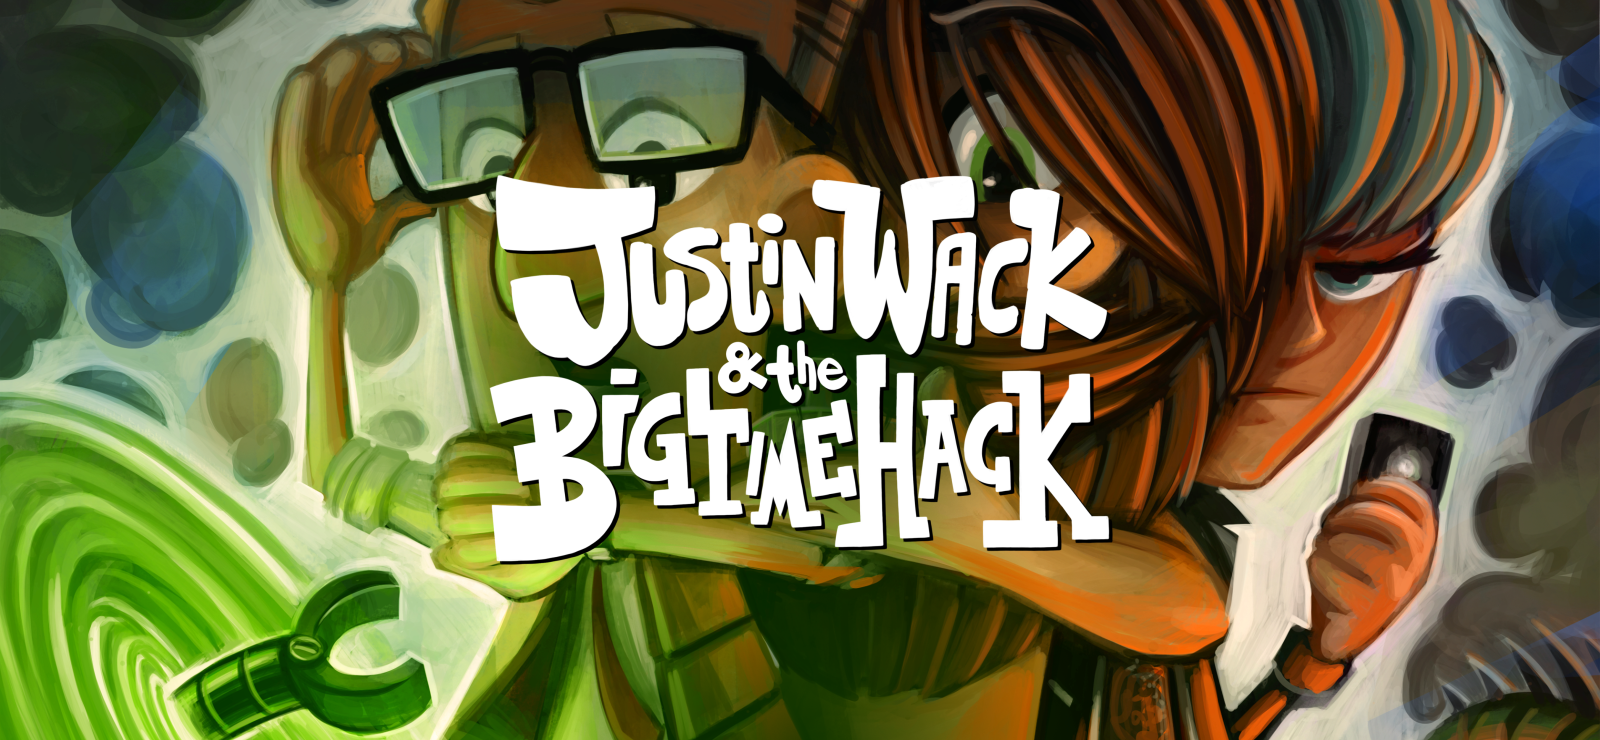 Justin Wack And The Big Time Hack